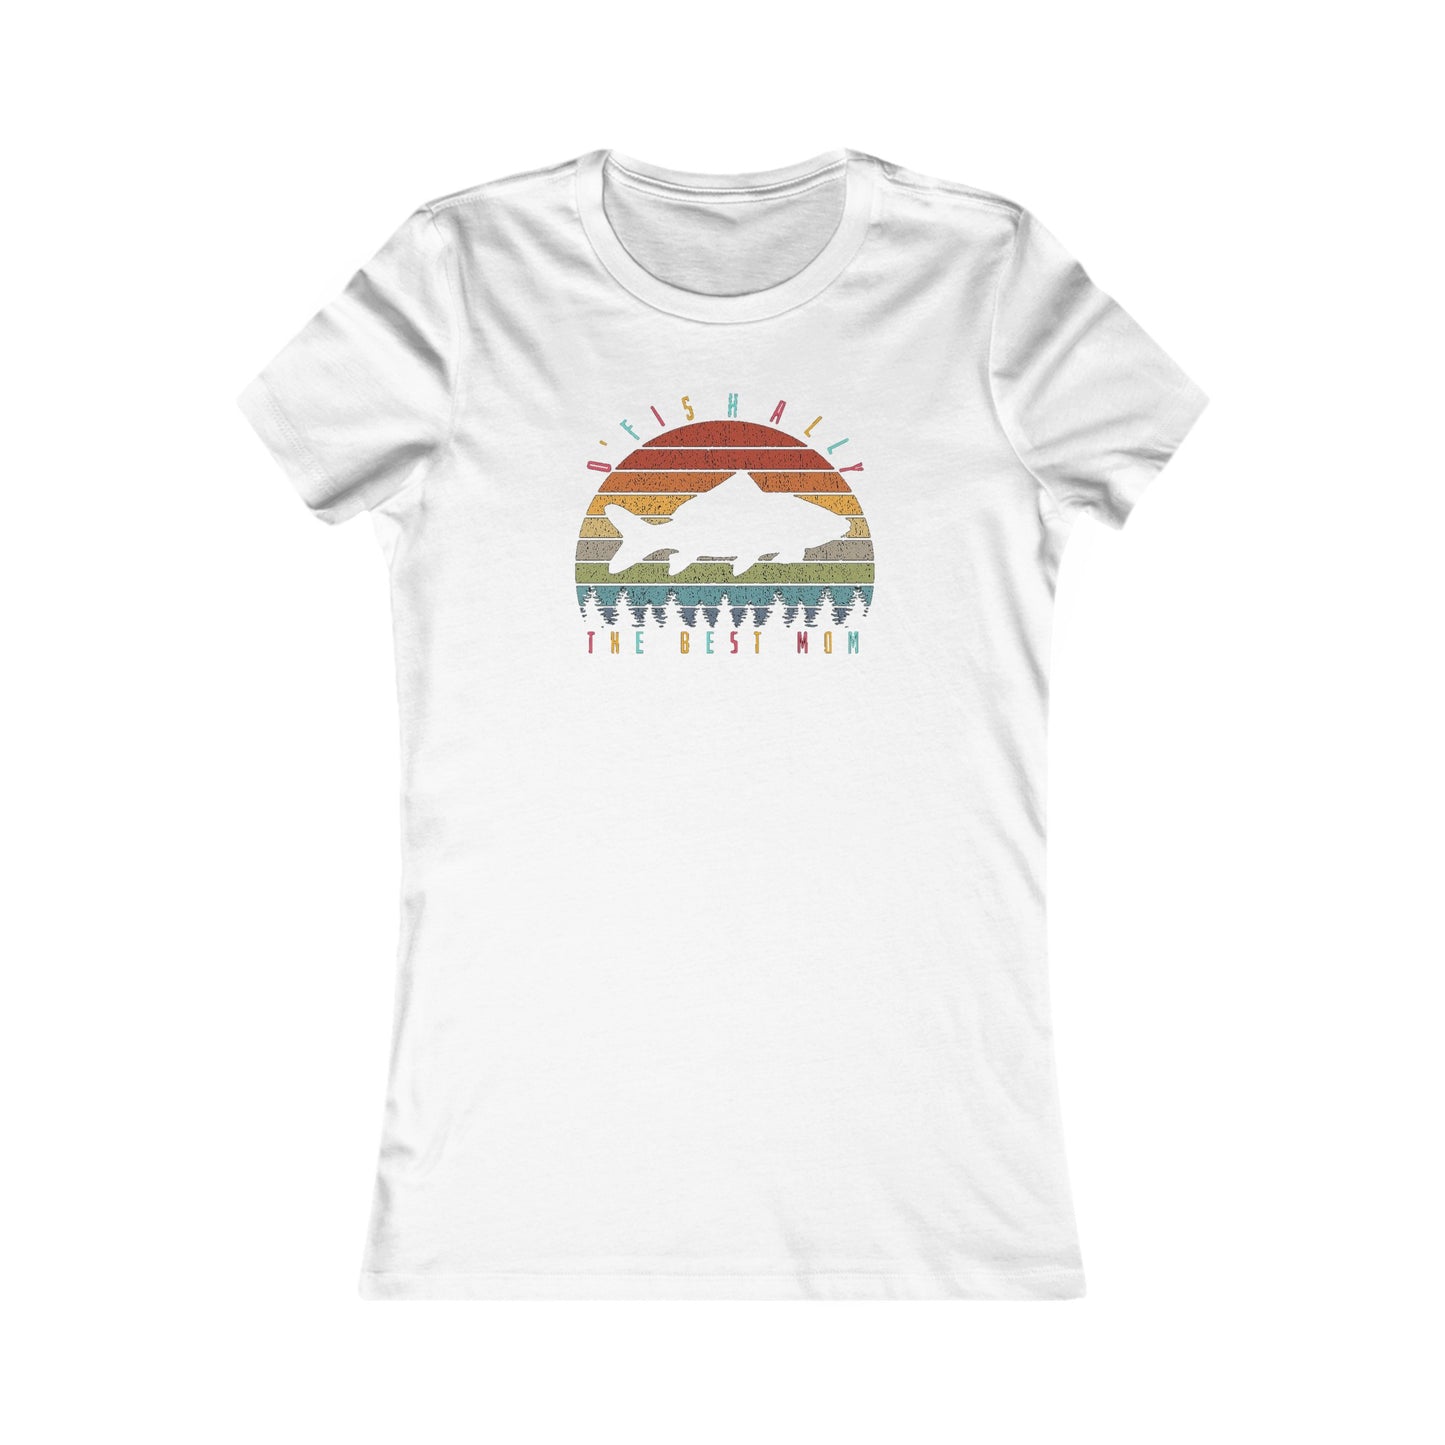 Mothers day shirt, T-shirt for mom